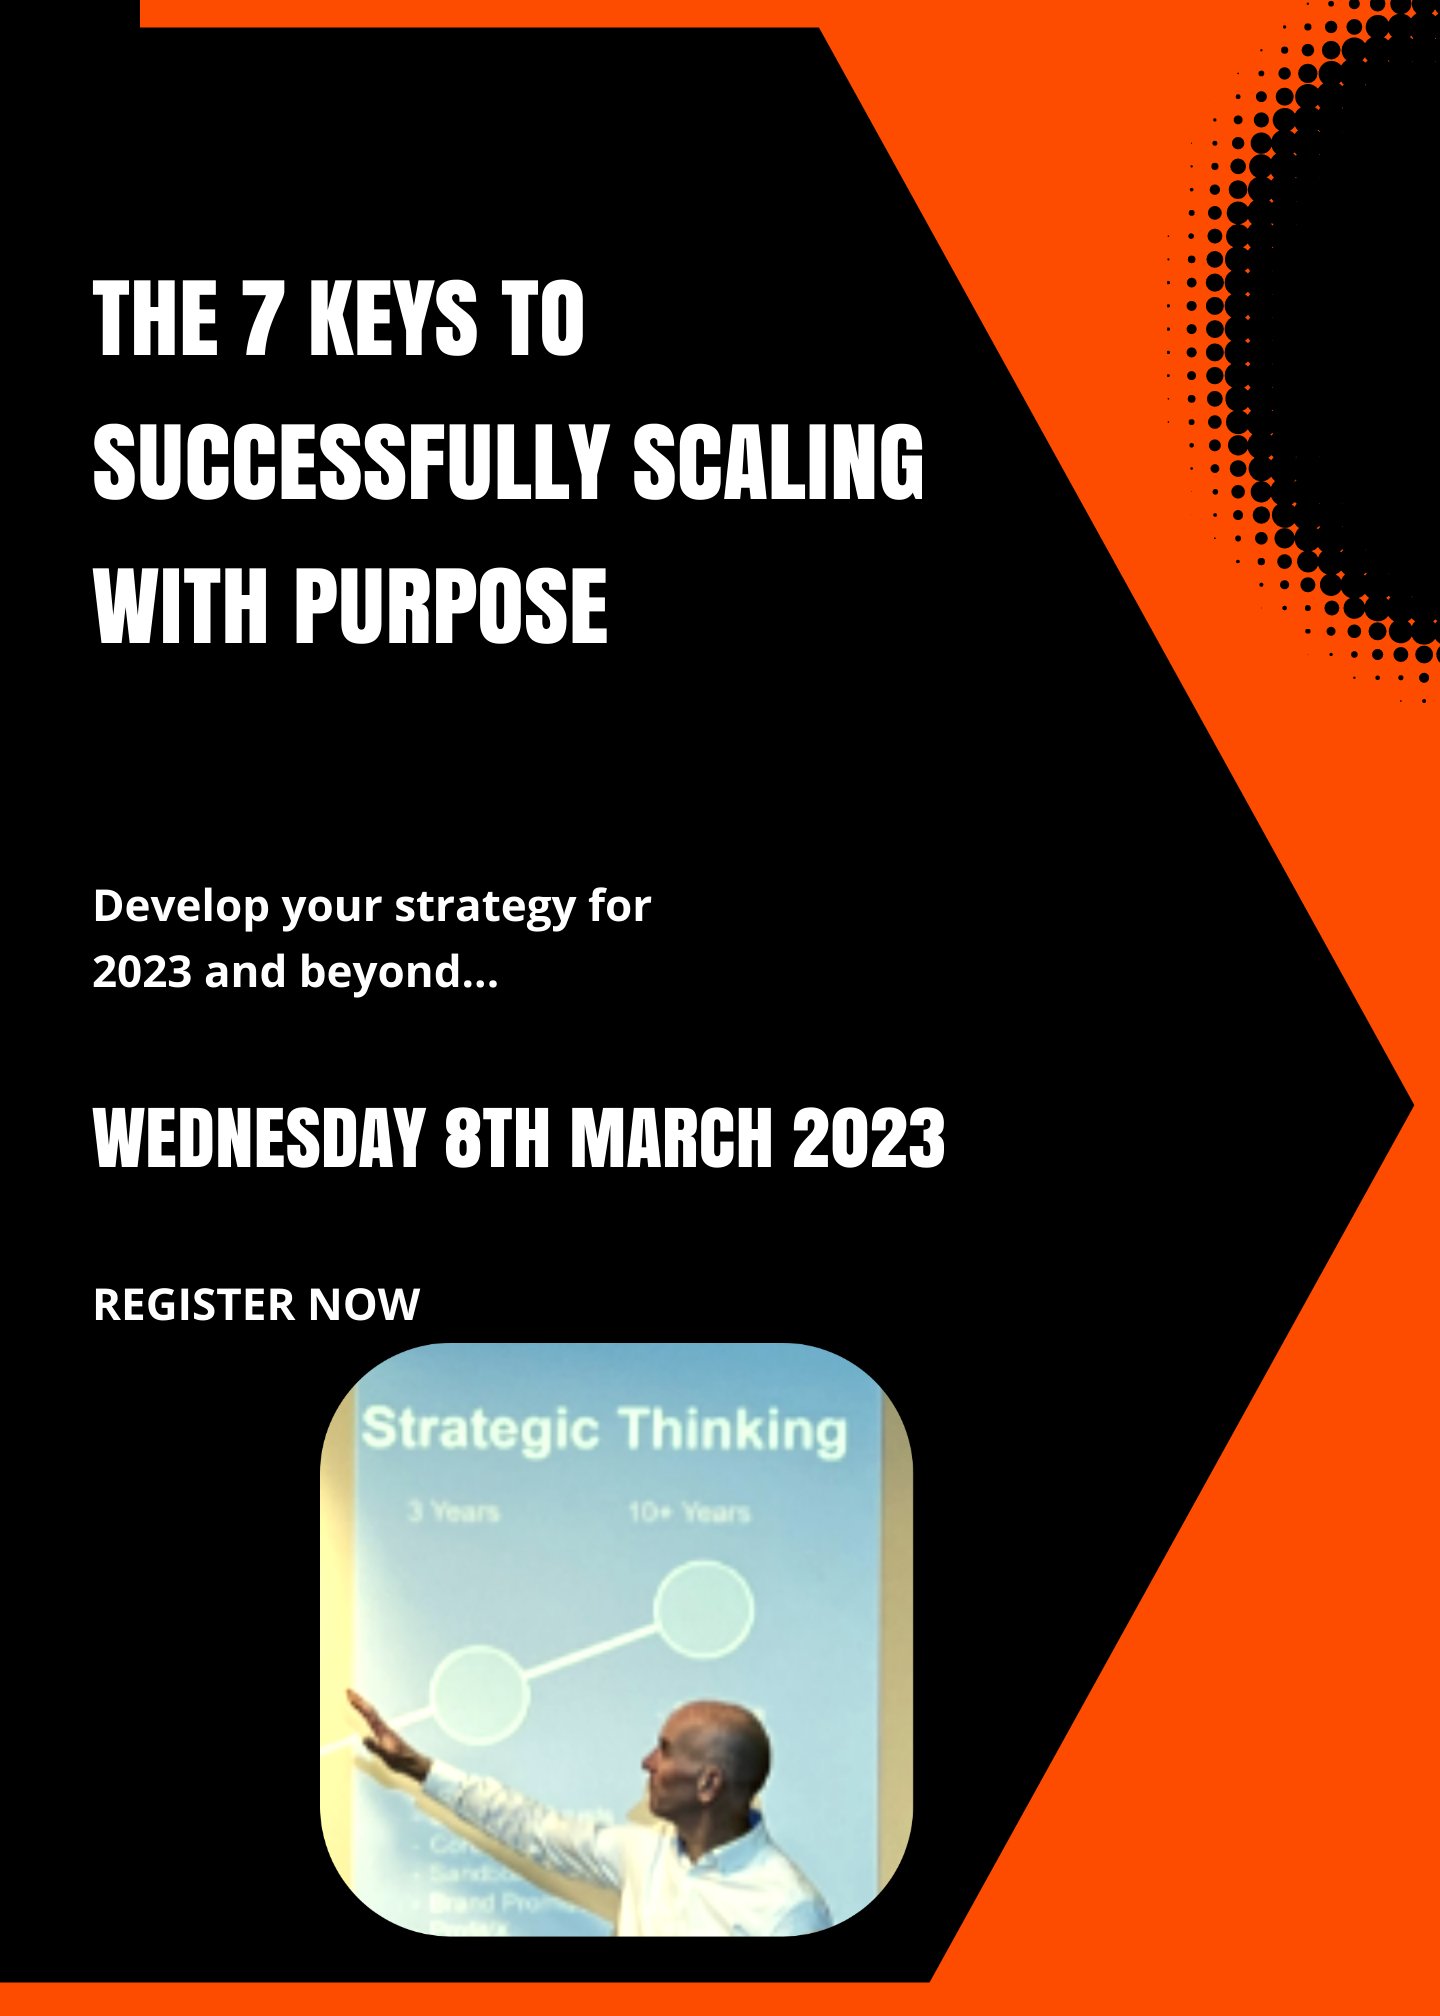 Learn the 7 key tips to scaling your business in 2023 and beyond